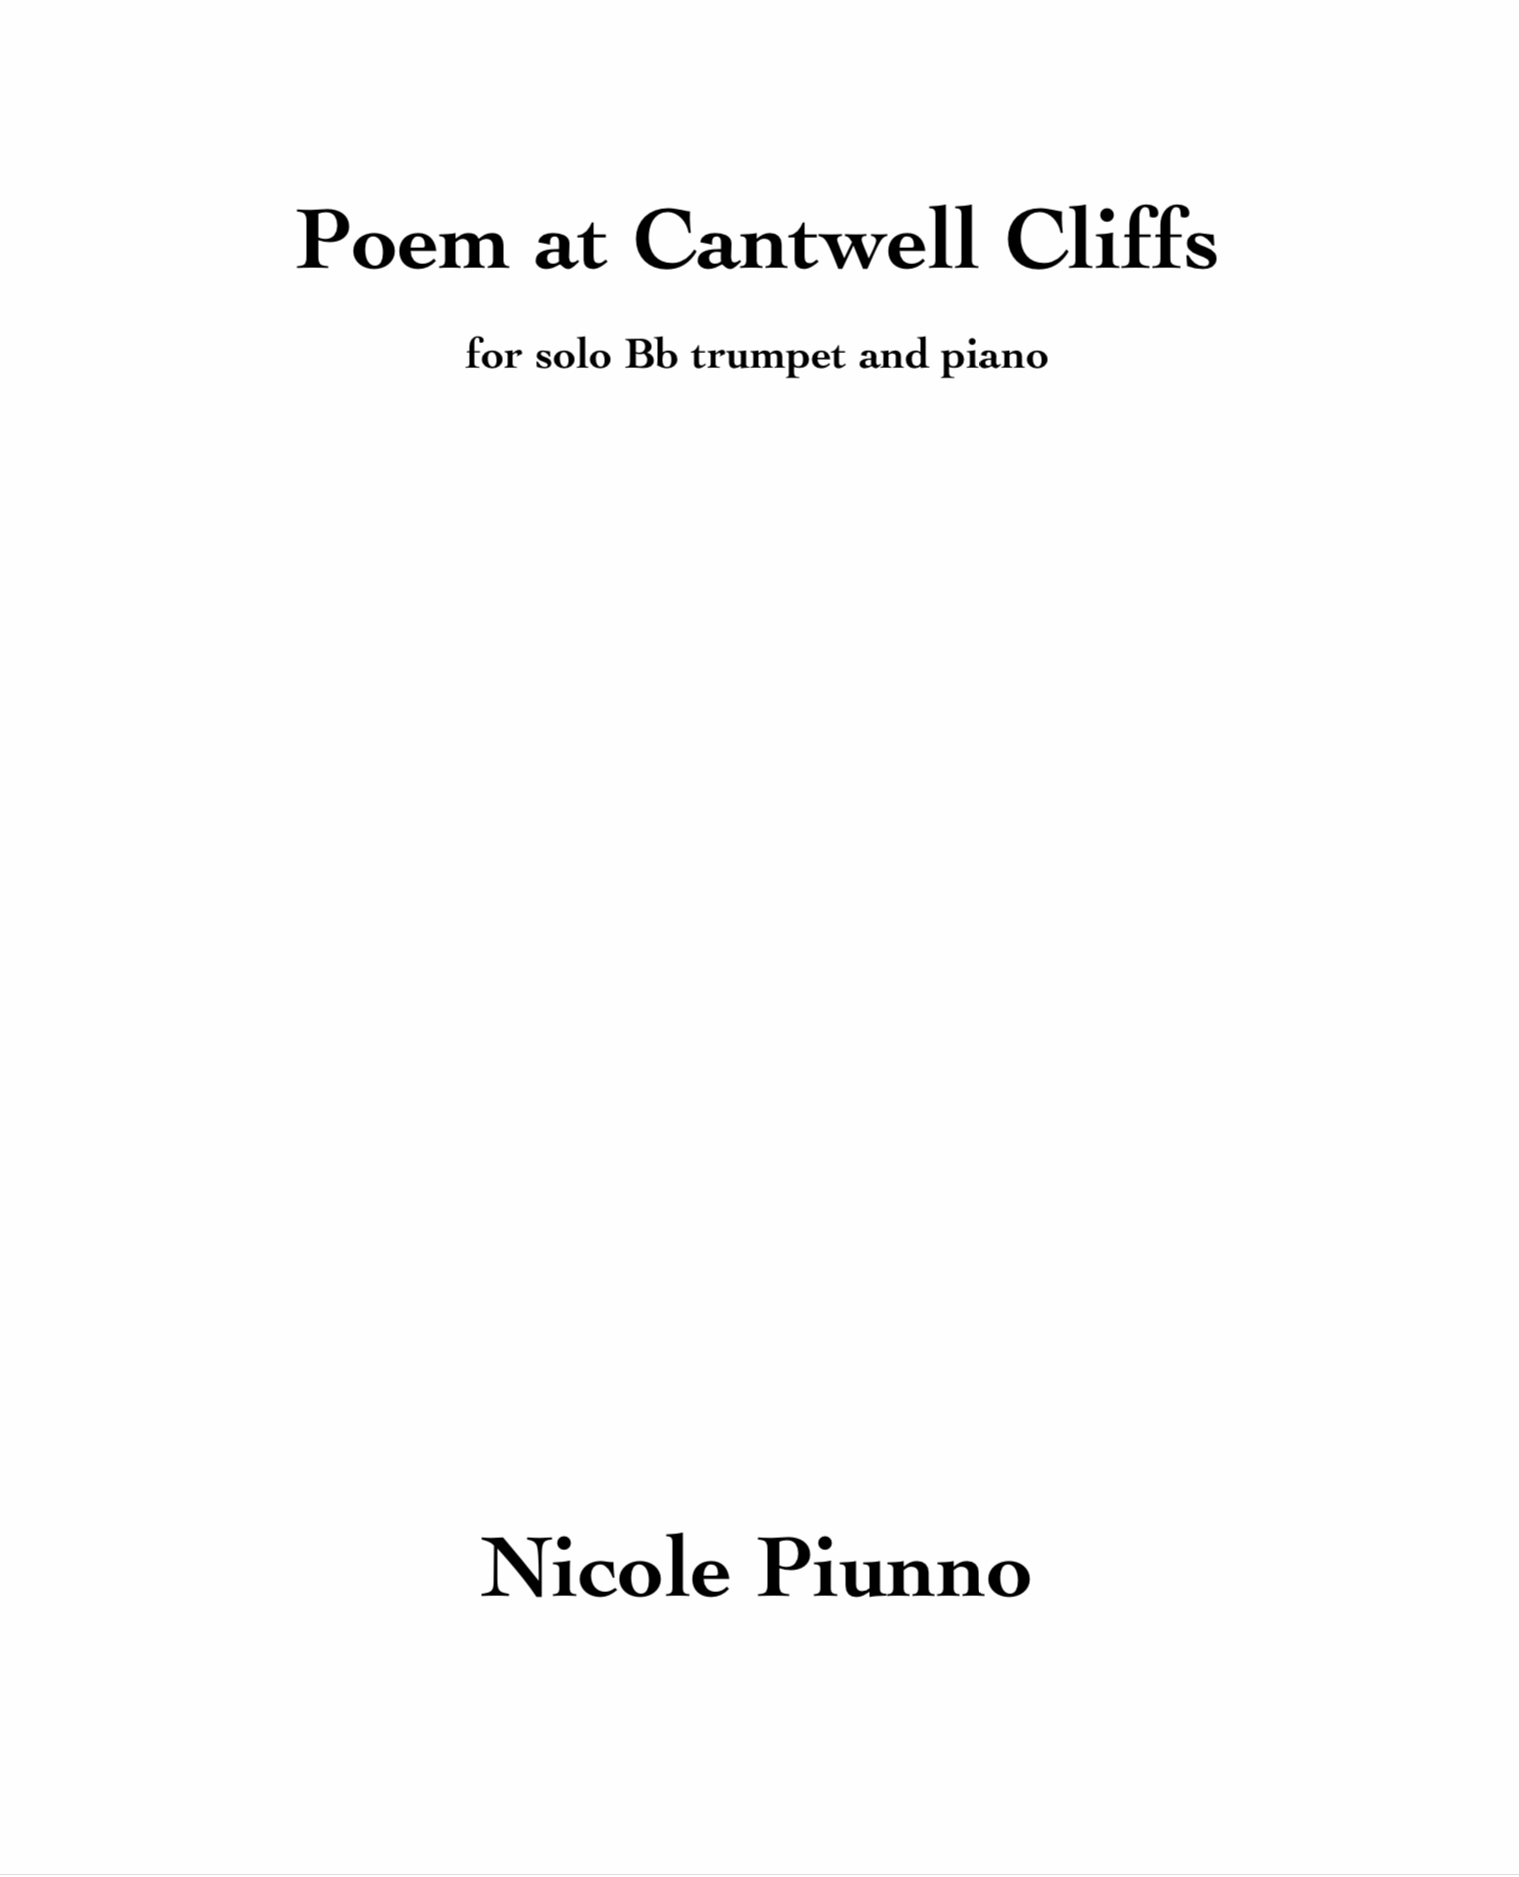 Poem At Cantwell Cliffs by Nicole Piunno